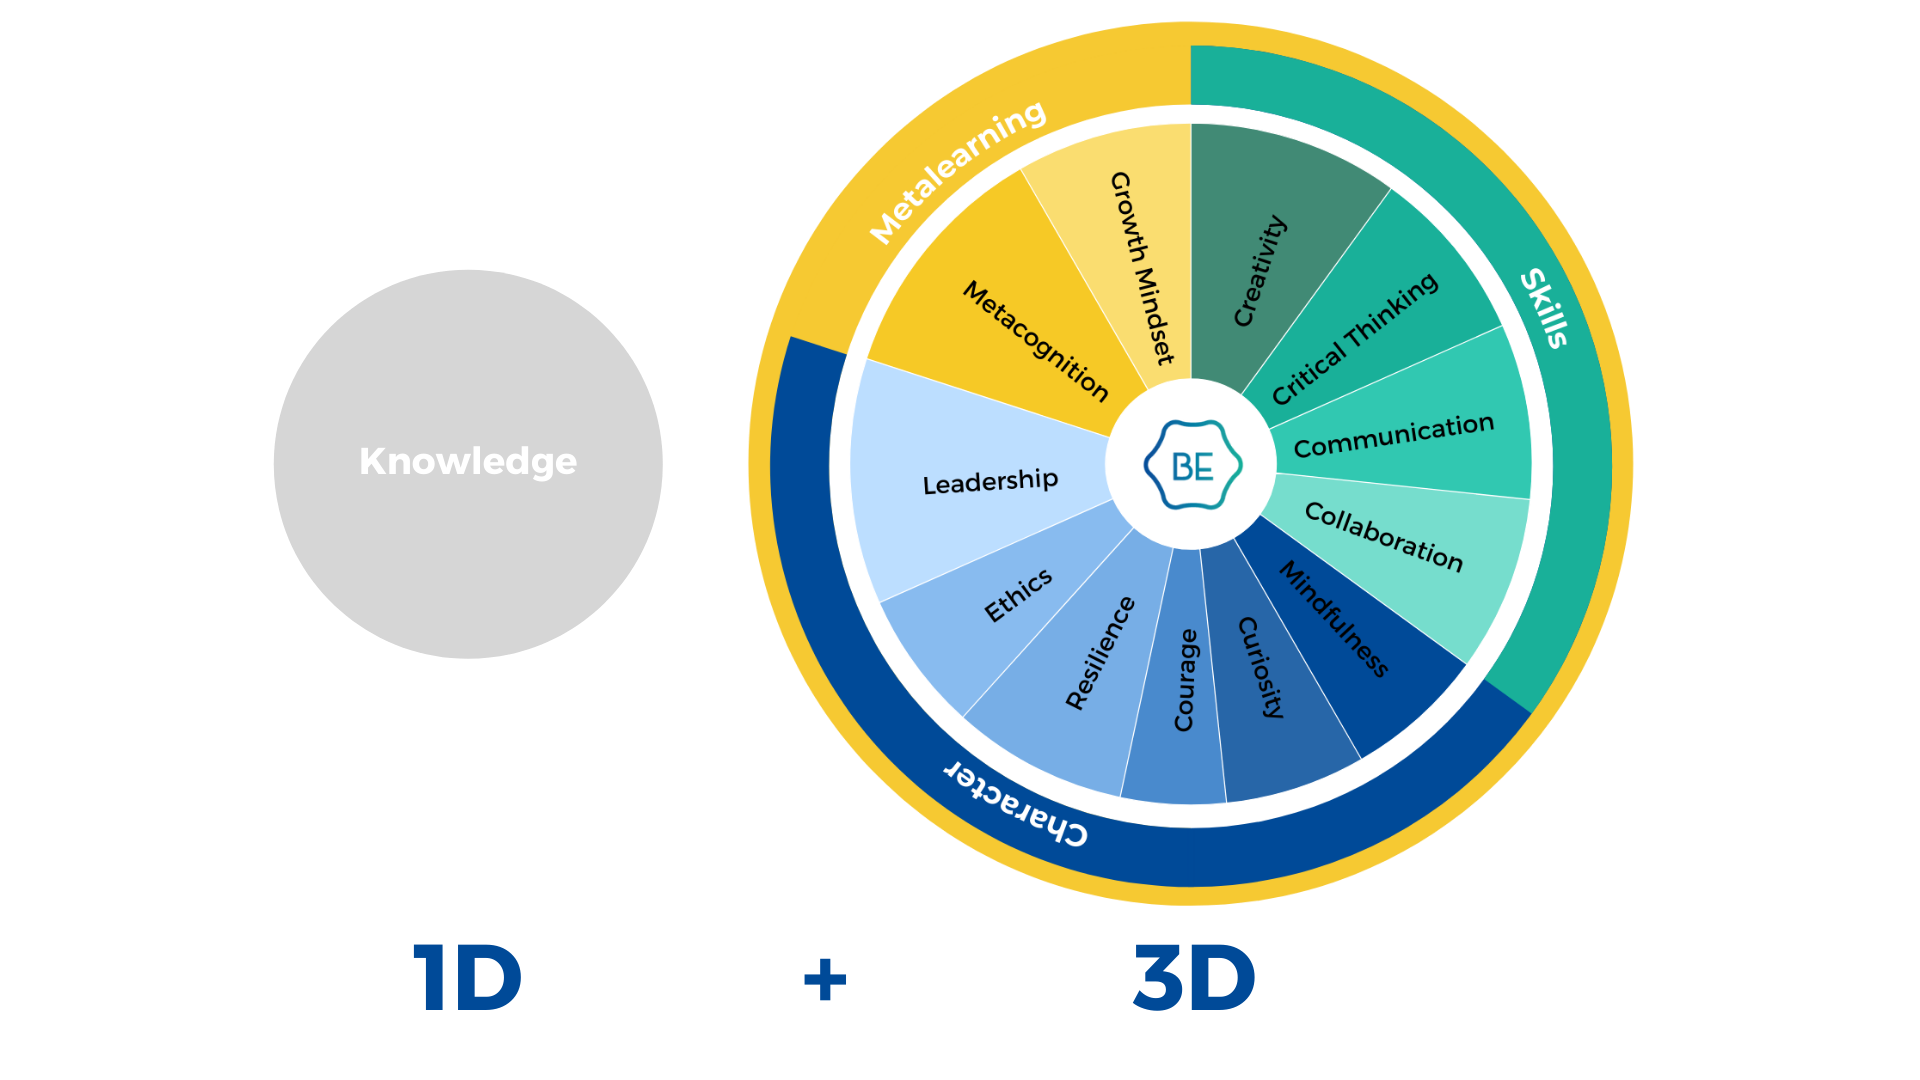 21st century competencies 4 dimensions of education. knowledge, metalearning, skills, and character